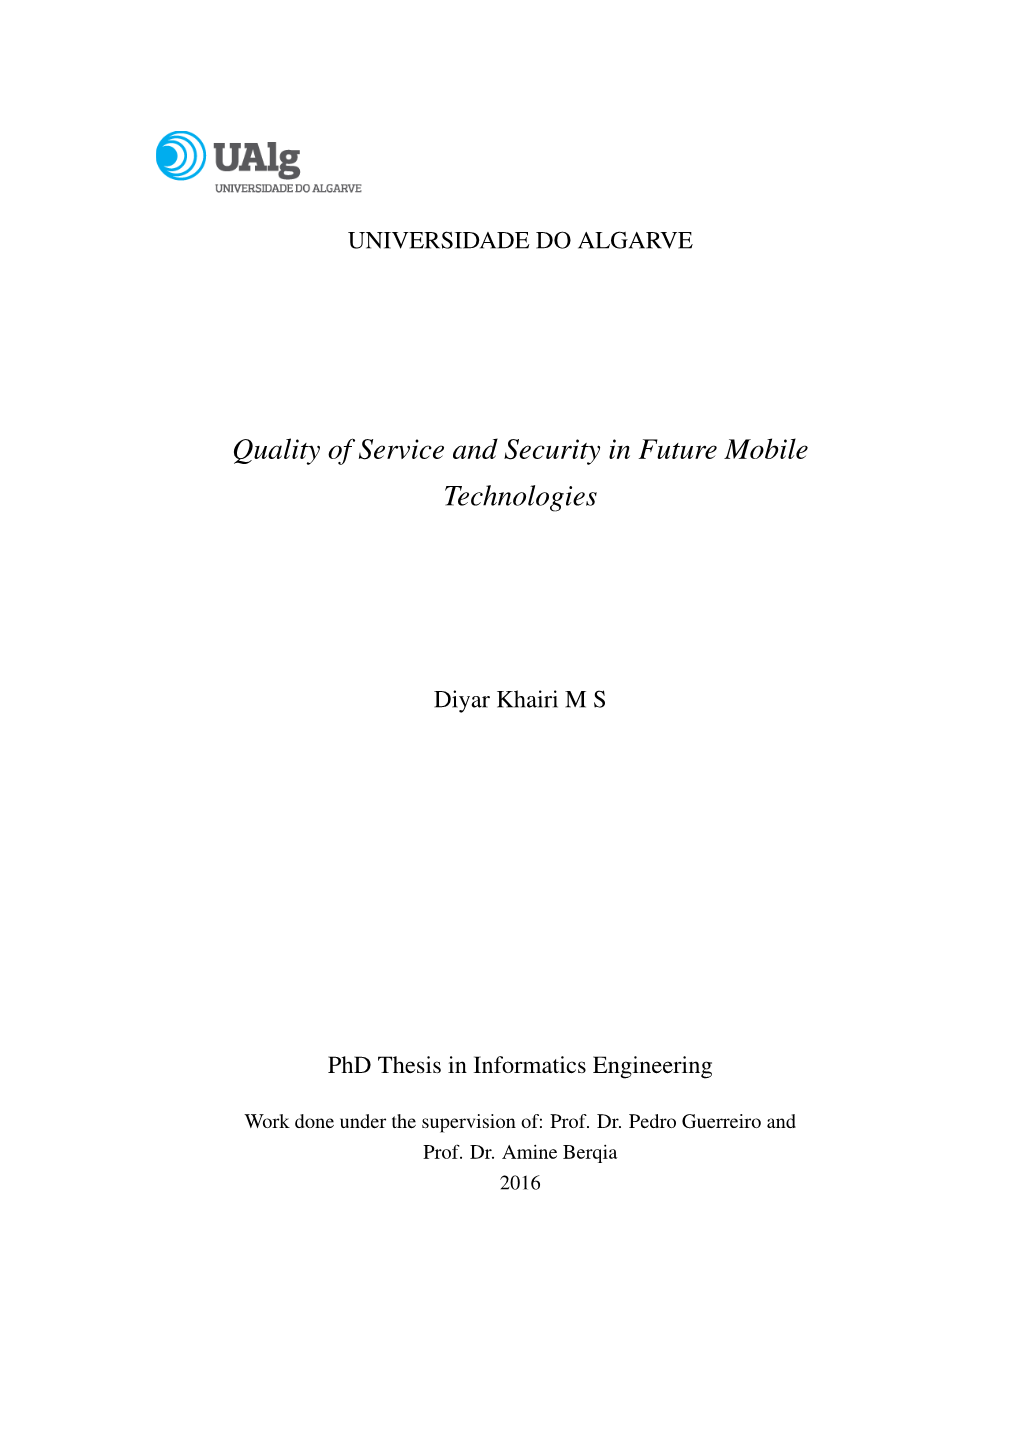 Quality of Service and Security in Future Mobile Technologies